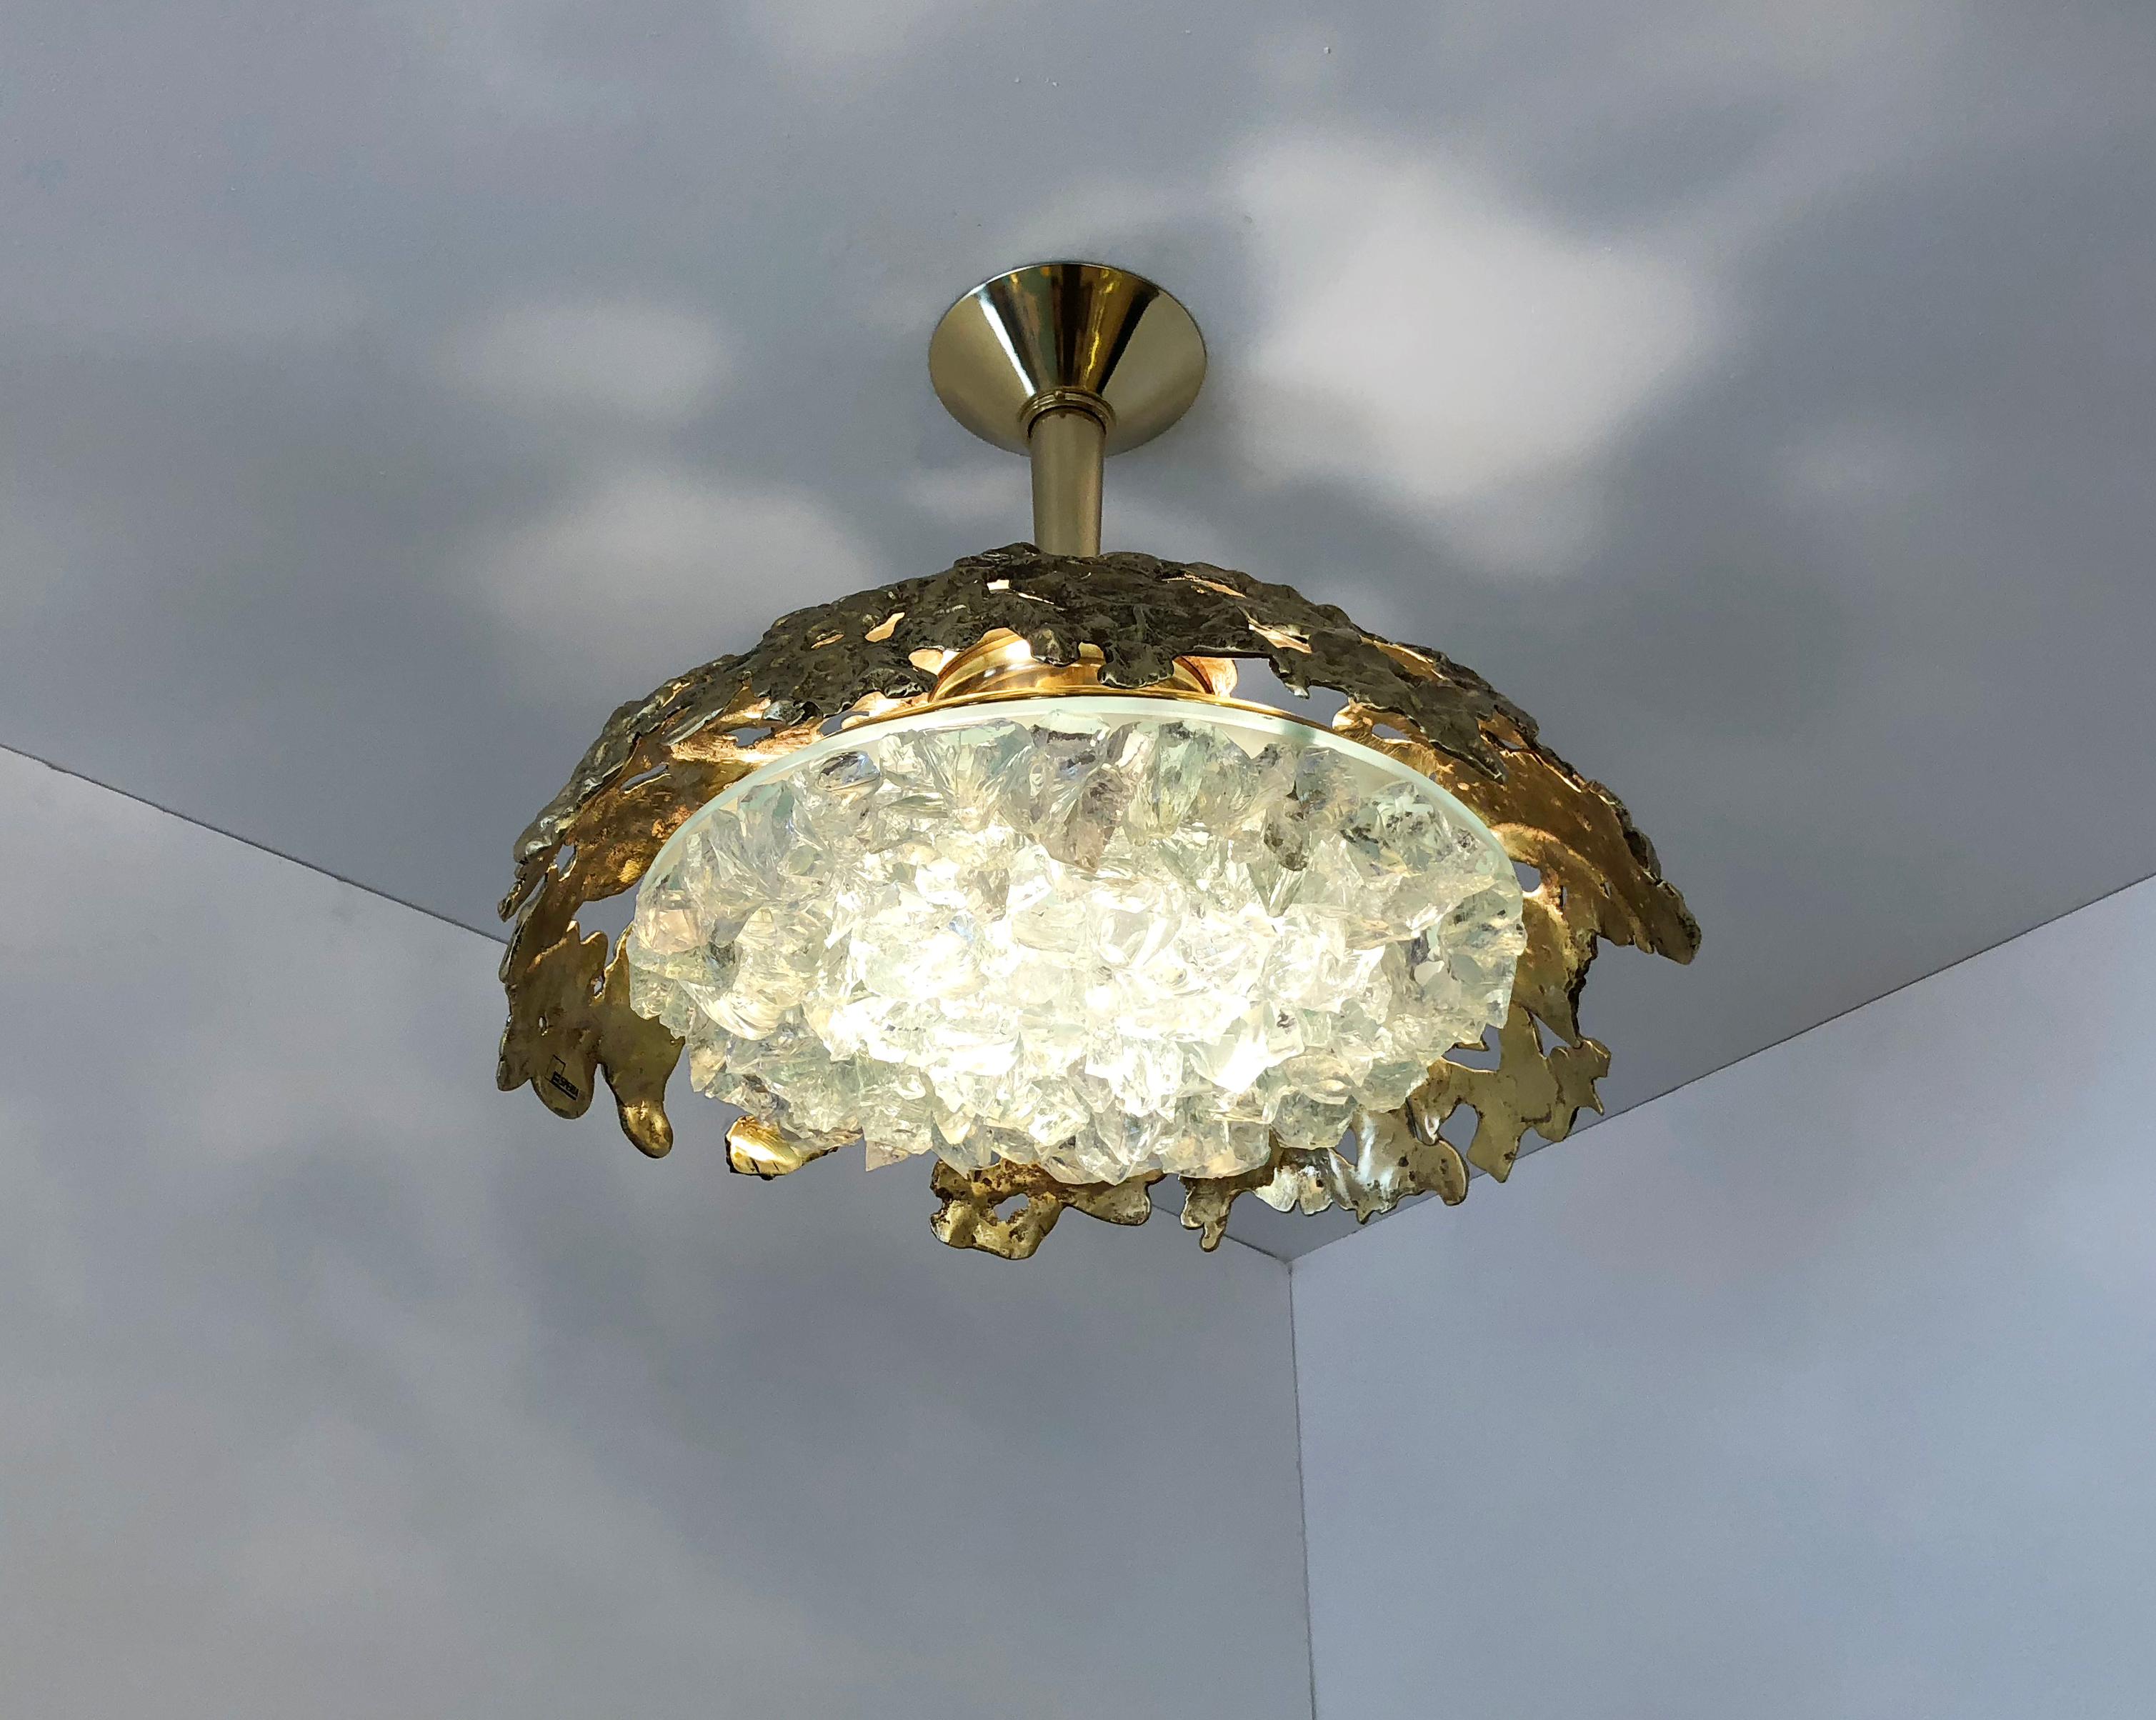 Blending sculpture and design, the N.21 is the largest fixture of the Etna series with an expansive glass shade composed of dozens of crystal elements. The organic cast brass shell culminates in a polished stem and canopy. Shown in polished brass